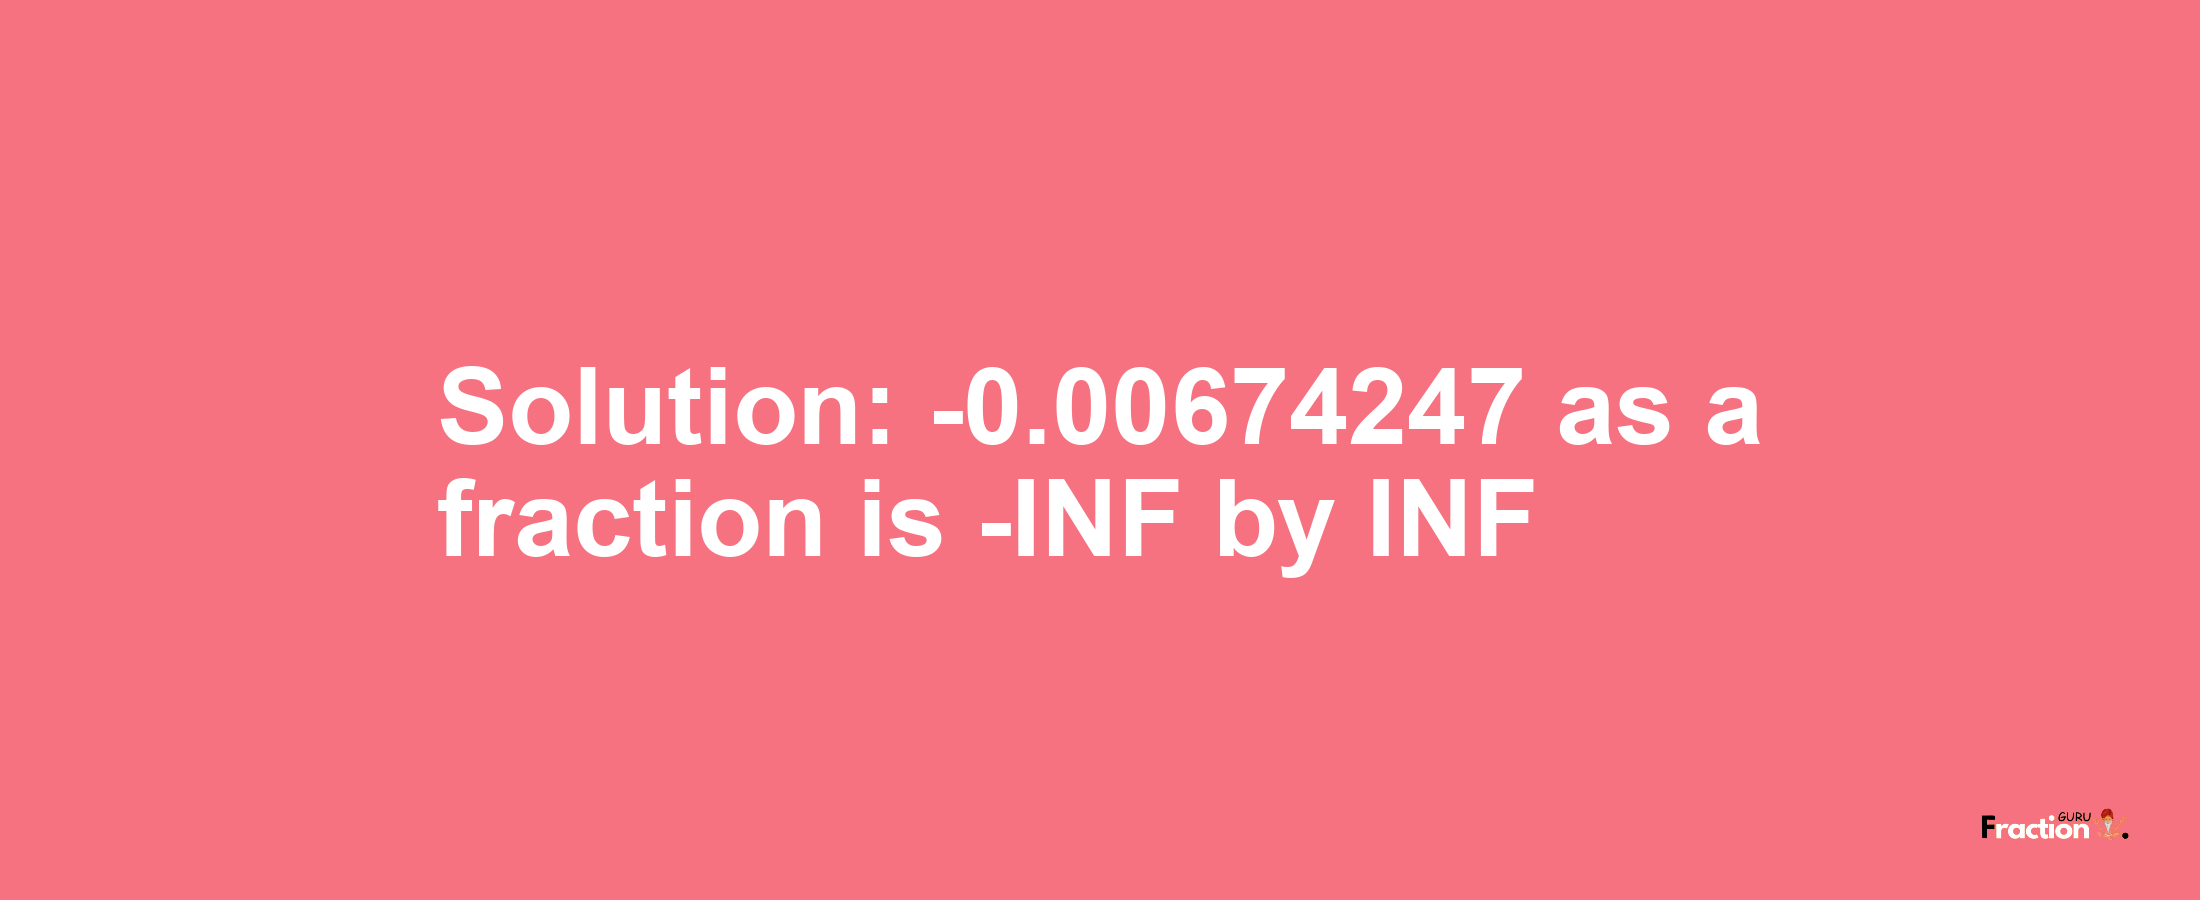 Solution:-0.00674247 as a fraction is -INF/INF